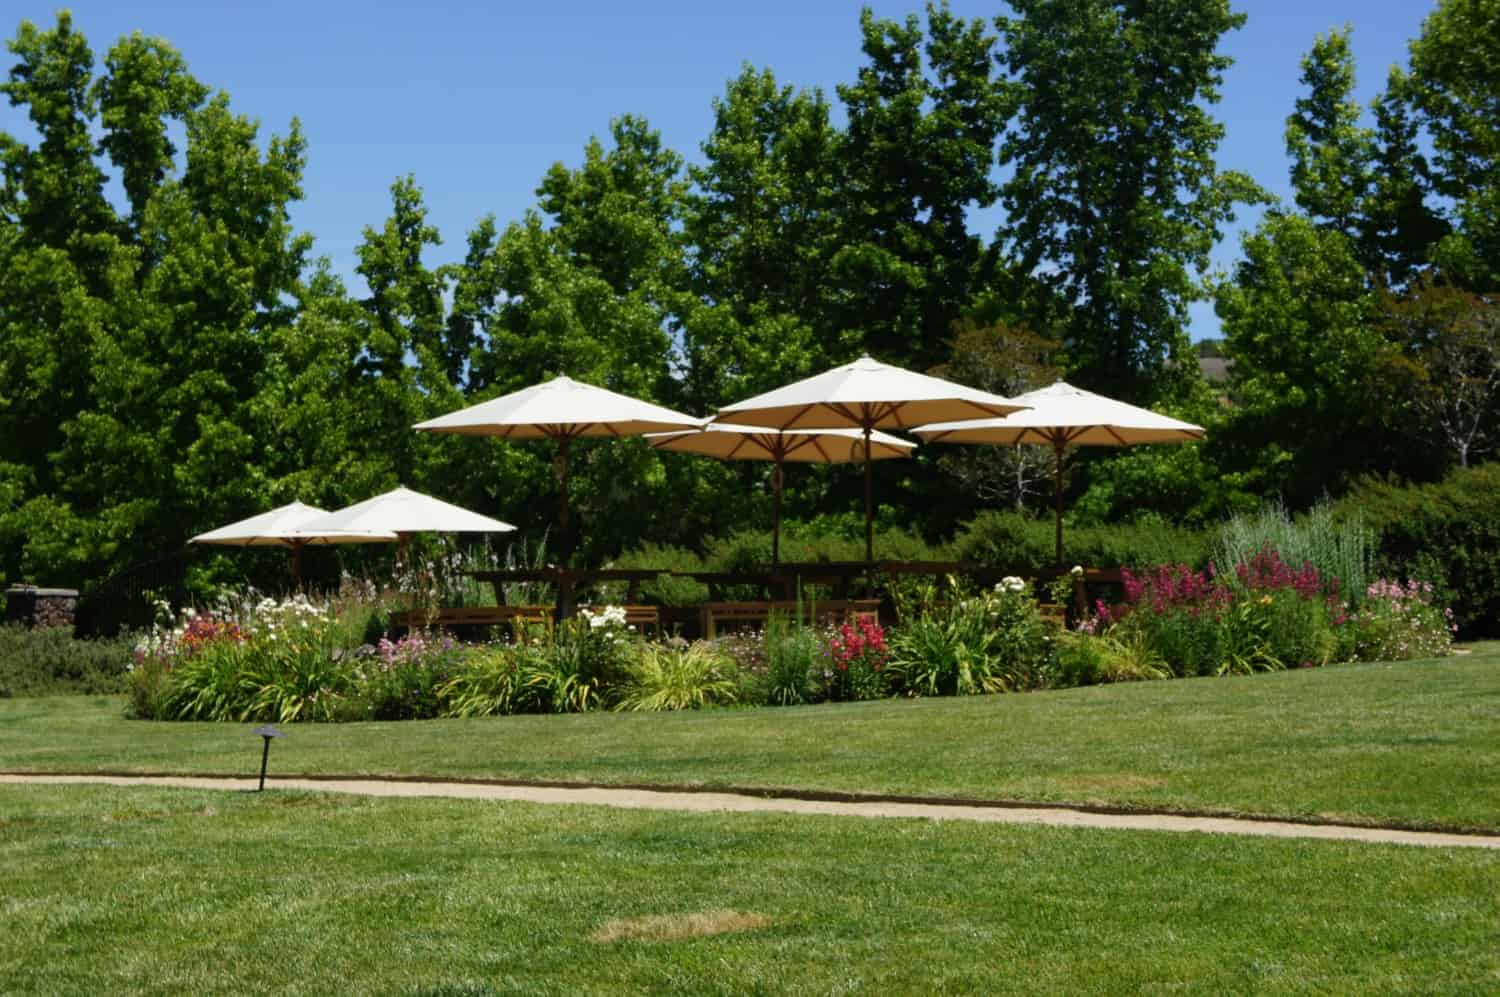 Dog Friendly Wineries in Sonoma - outdoor patio surrounded with flowering plants with umbrellas for shade